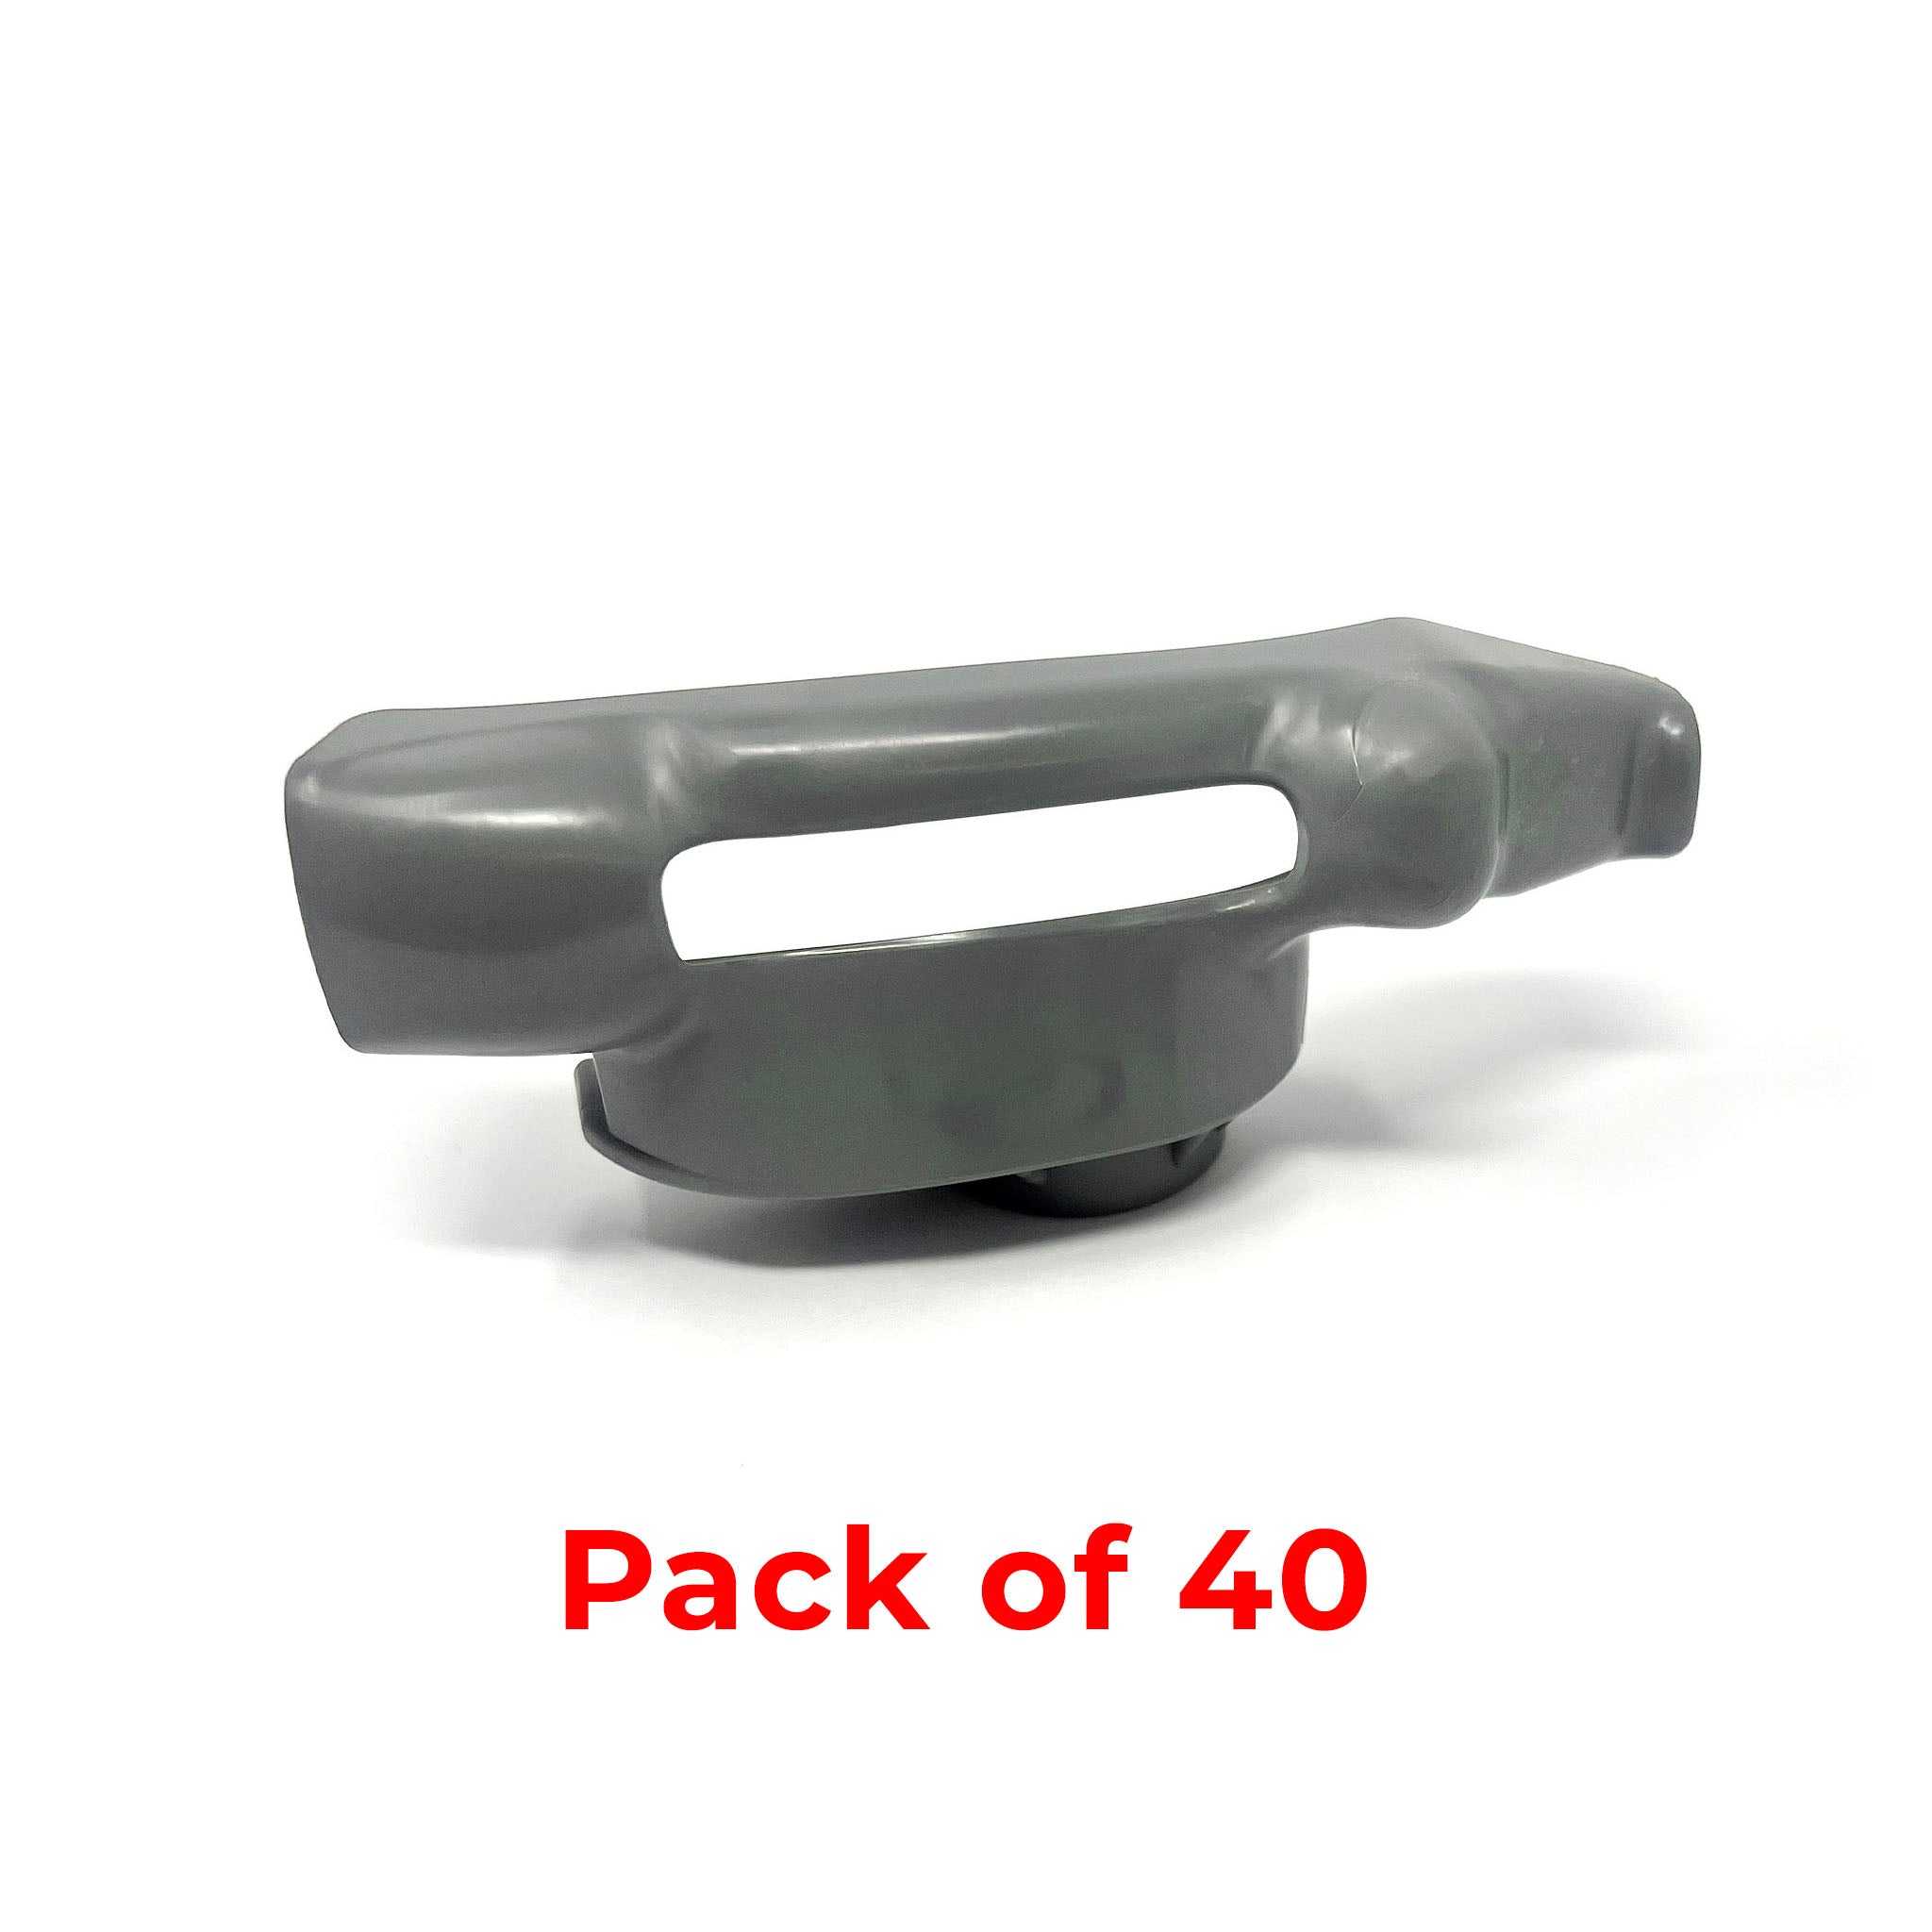 High Spoke M/D Head w/ Low Profile for Coats - USA MADE! Gray - Head Only - 40 pk